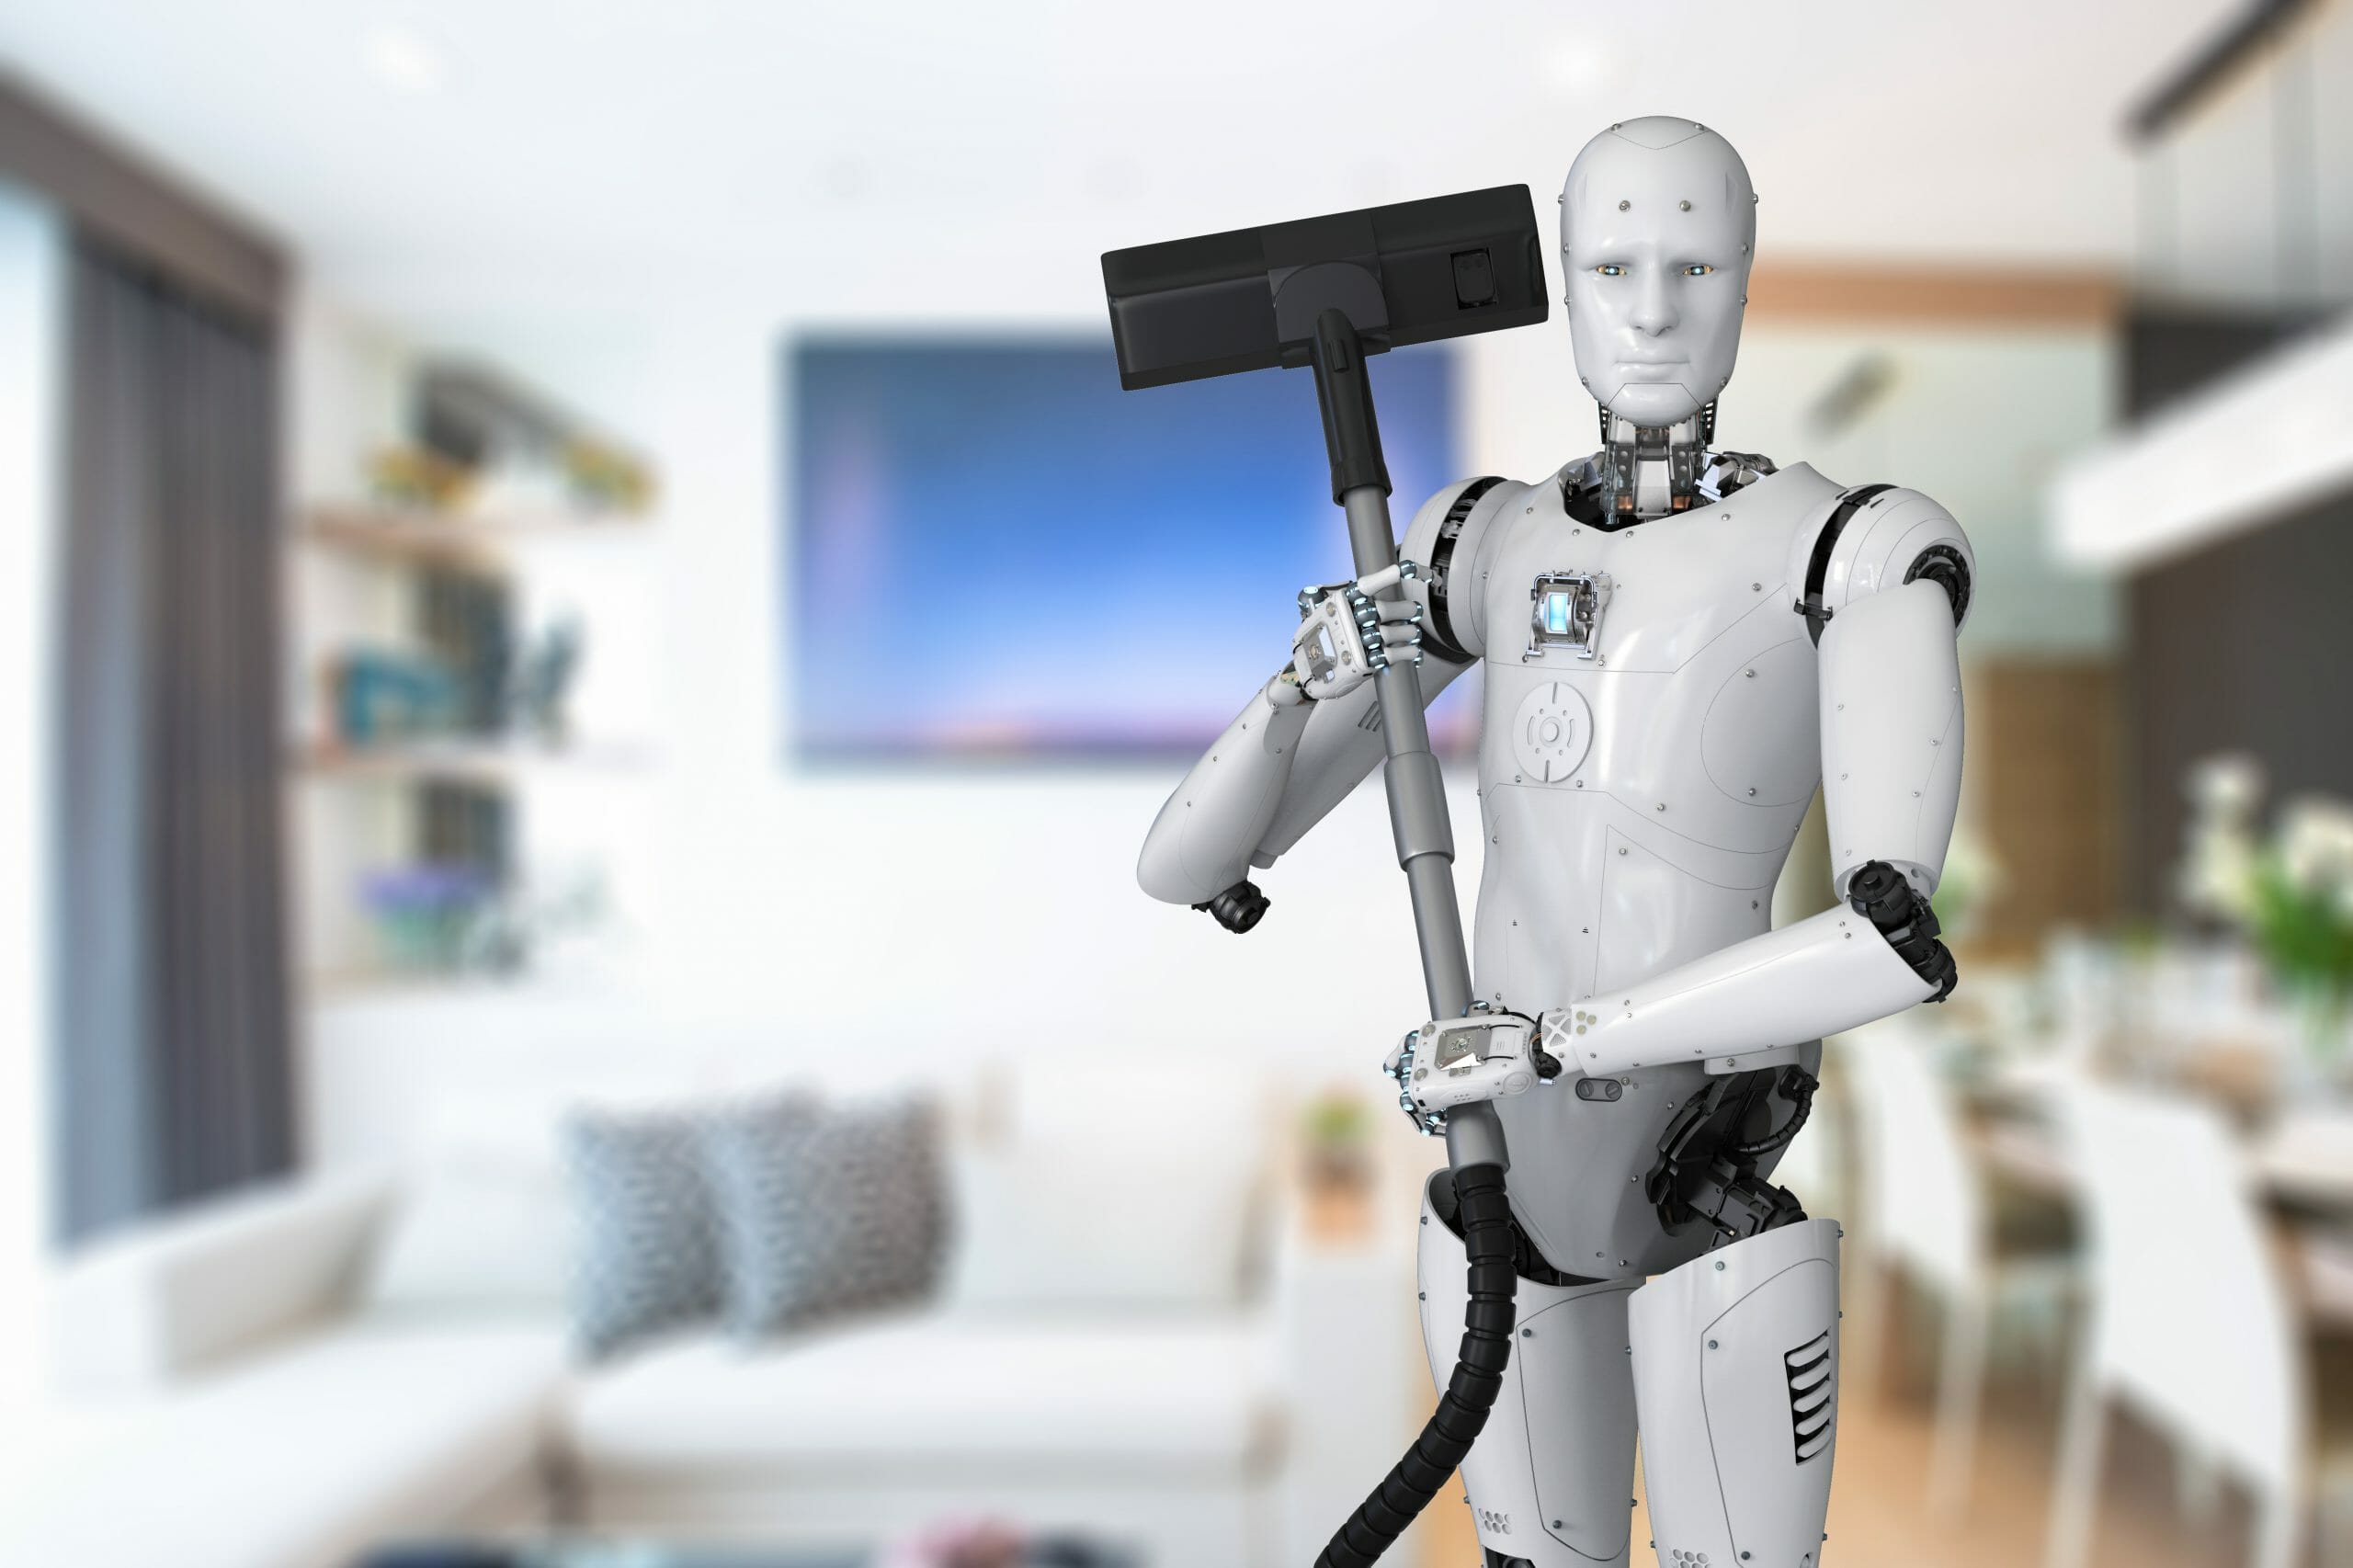 Robot cleaning up the house